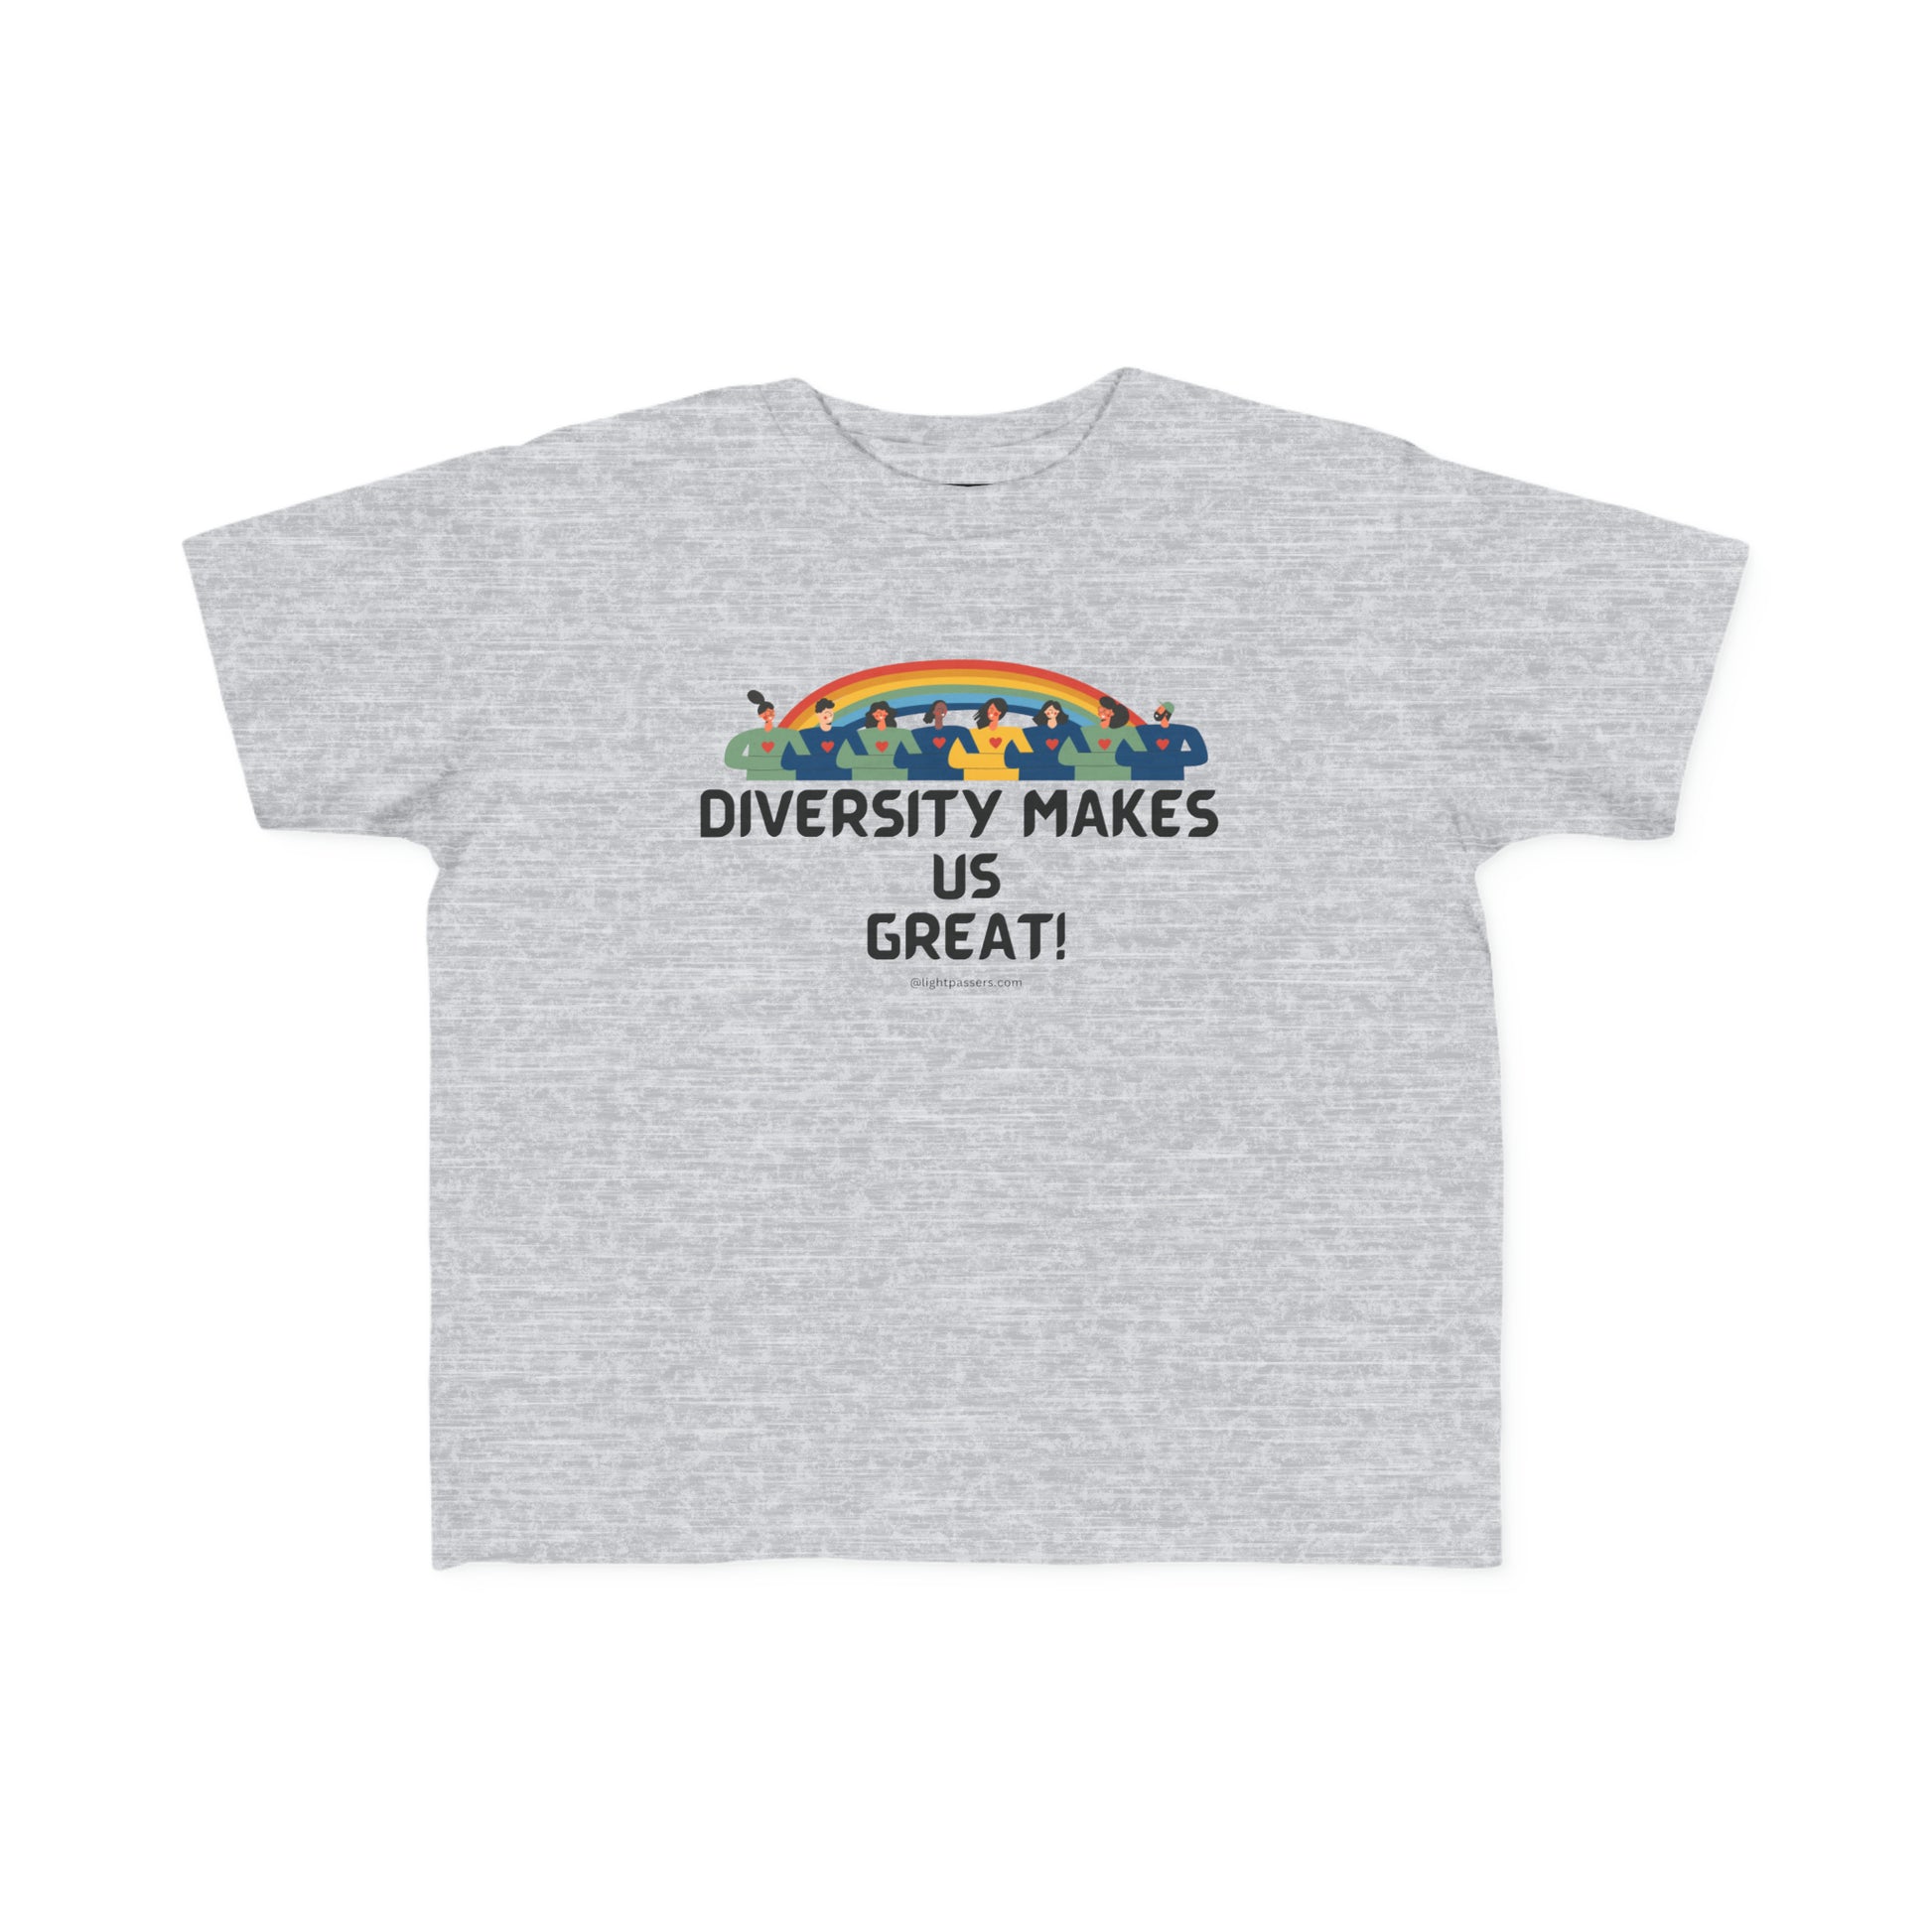 A grey toddler t-shirt featuring a rainbow graphic with a group of people and hearts. Made of soft, 100% combed cotton, light fabric, tear-away label, and a classic fit.